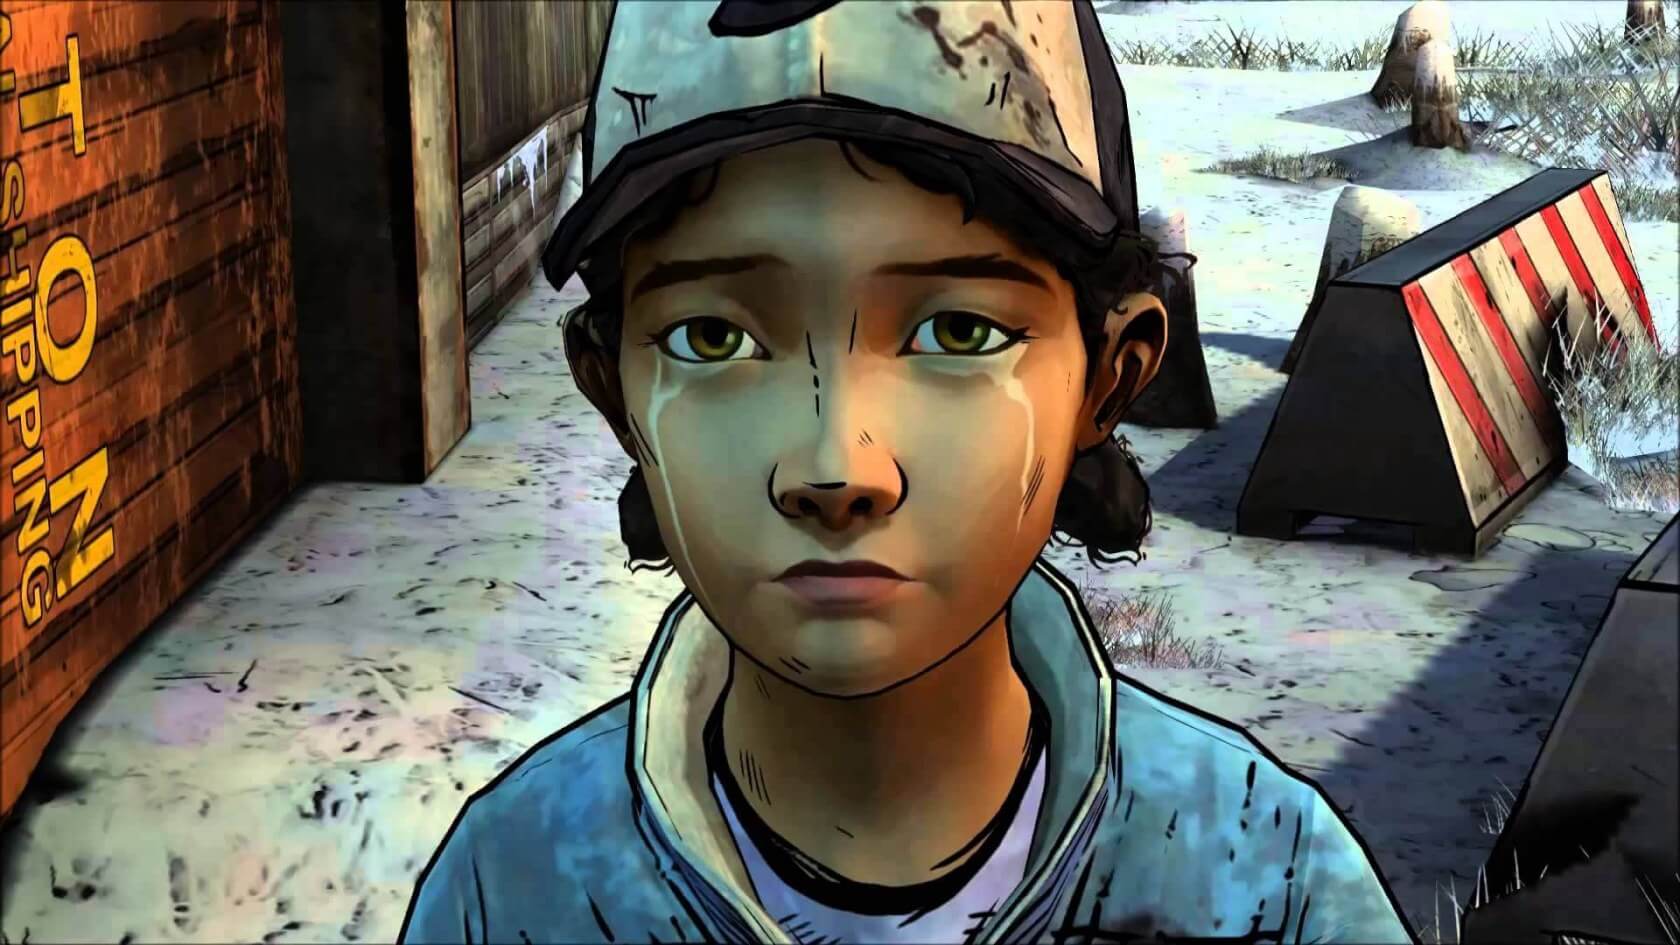 Telltale's 'The Walking Dead' adventure game franchise is returning to Steam